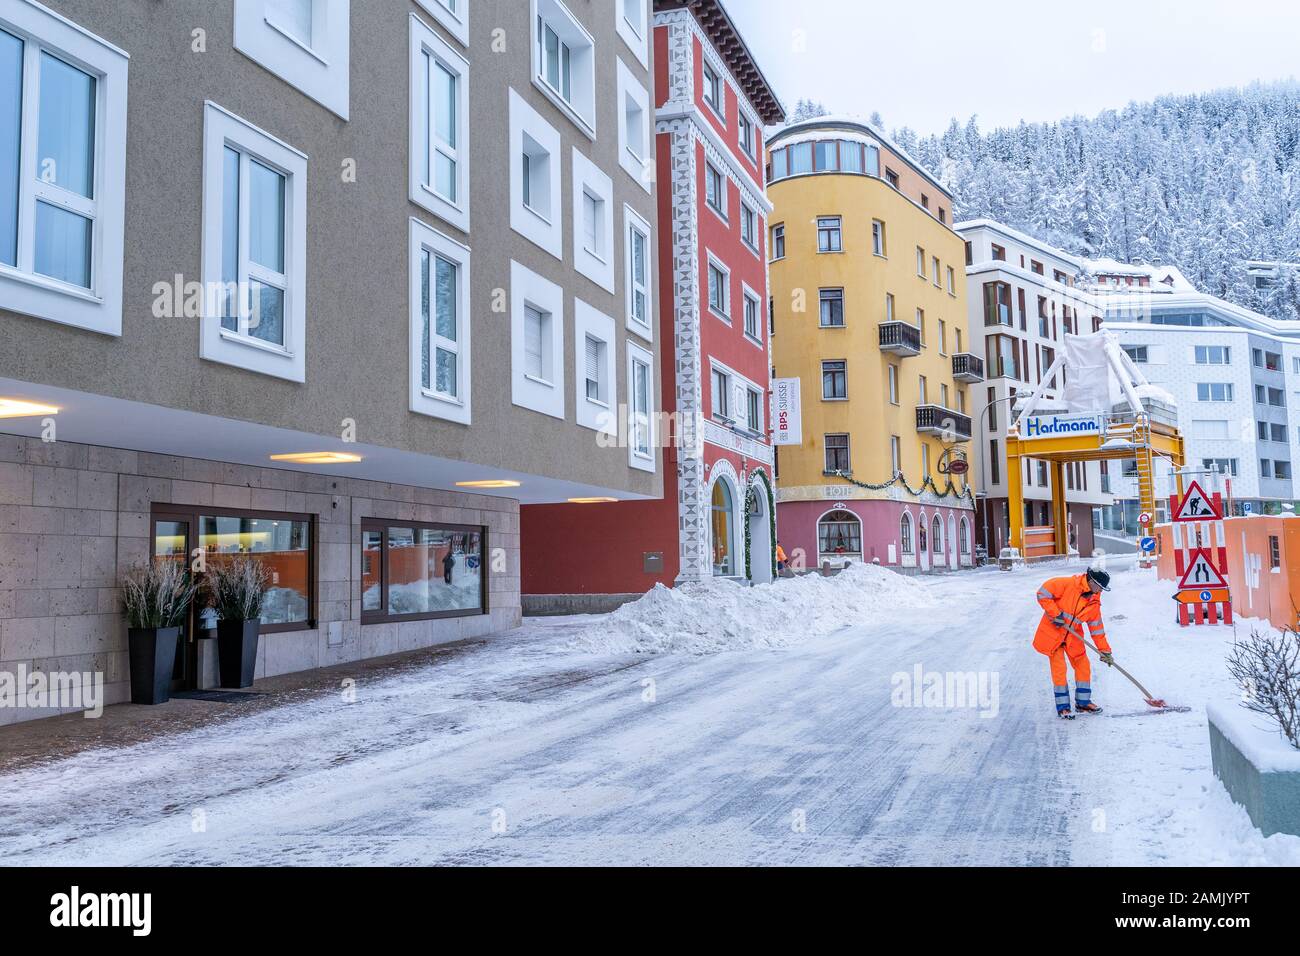 St. Moritz, Switzerland - 22 December - Road cleanup worker in bright orange coat clears up snow from the road at a street in St. Moritz, Switzerland Stock Photo